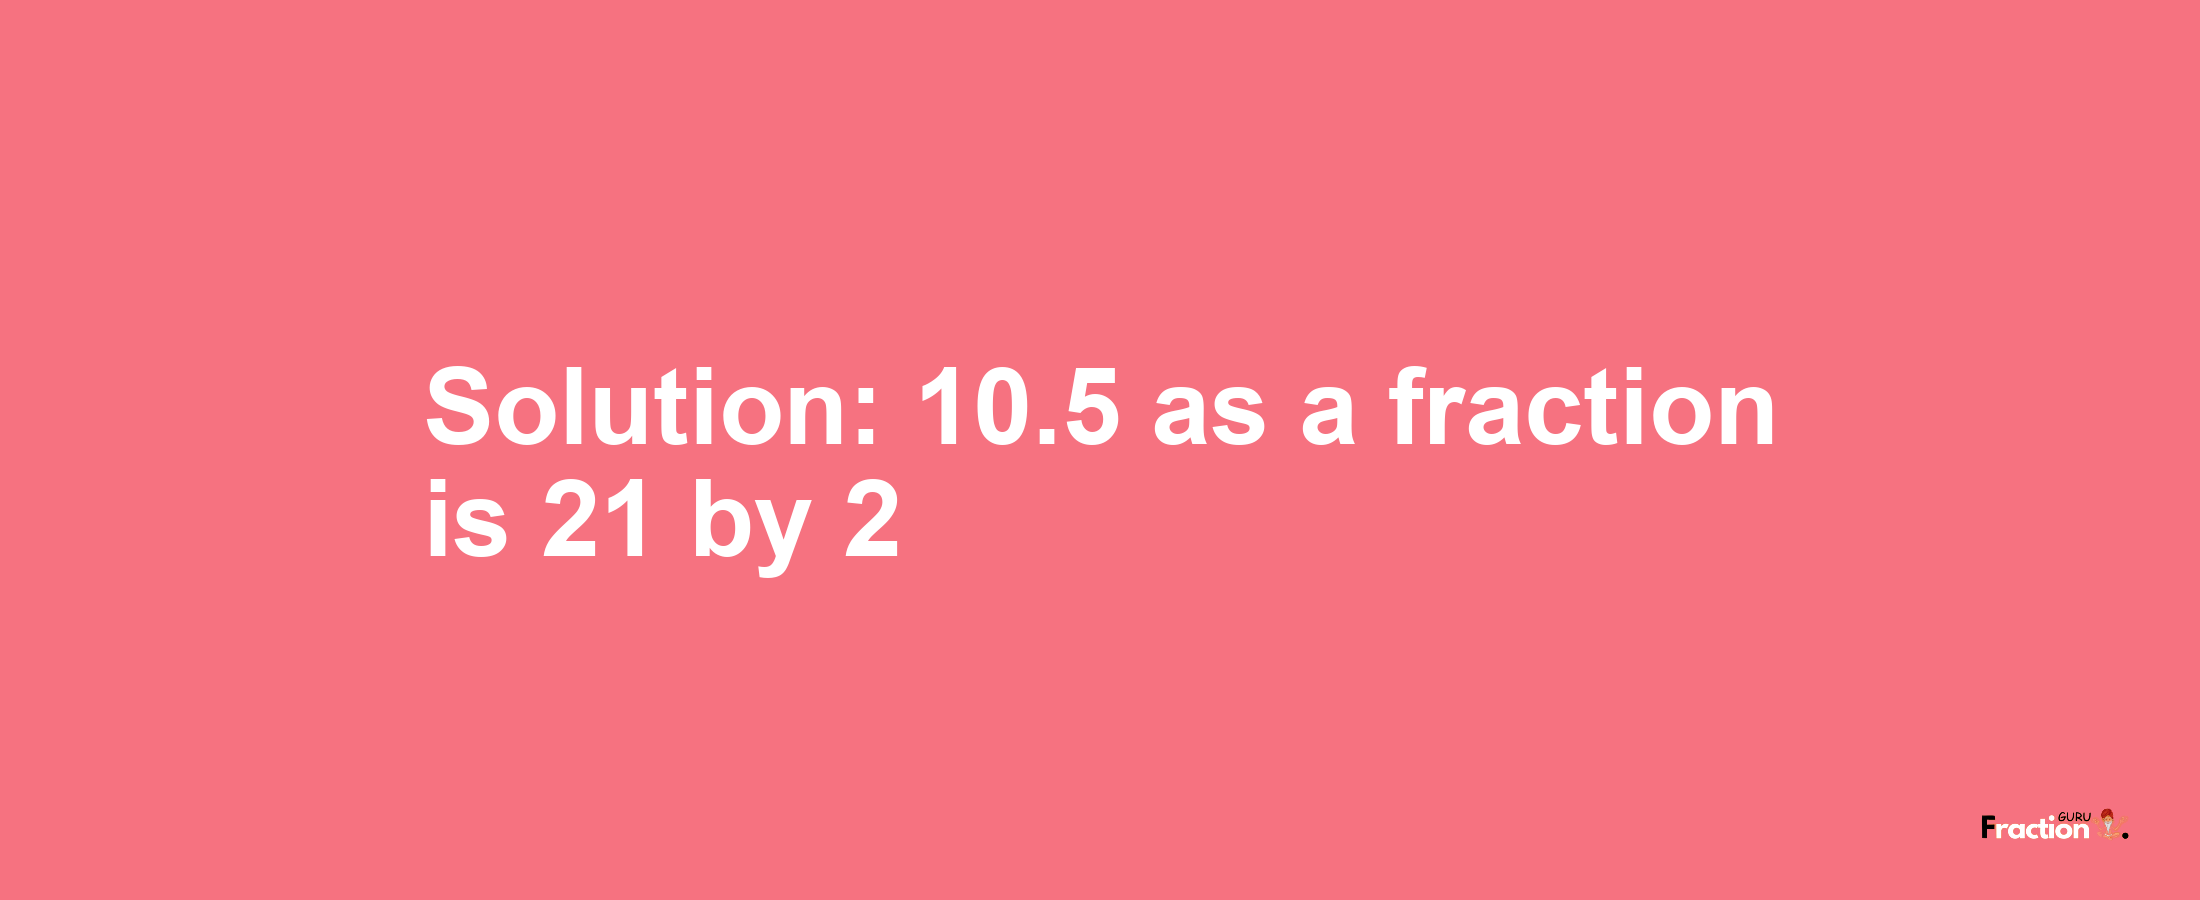 Solution:10.5 as a fraction is 21/2